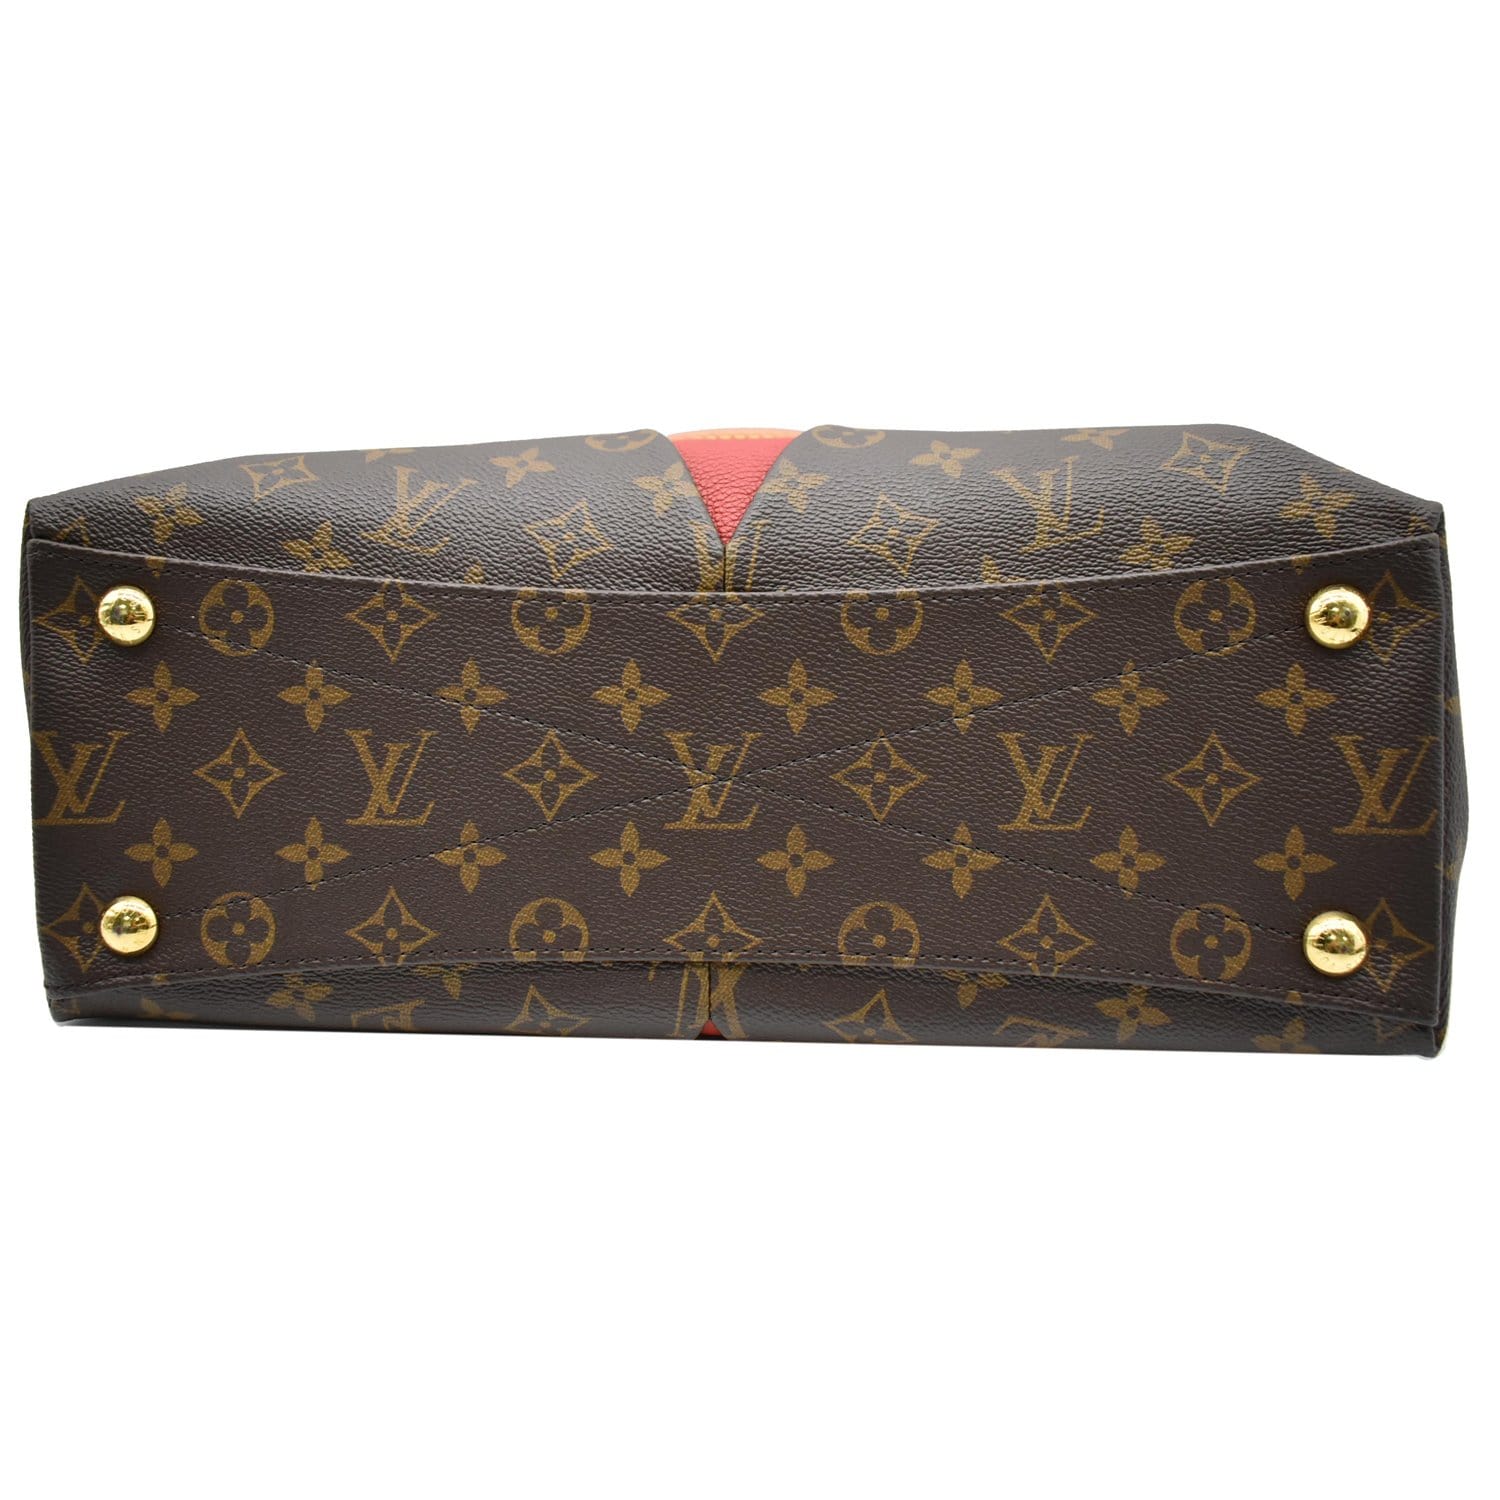 Louis Vuitton V Line Tote Bags for Women